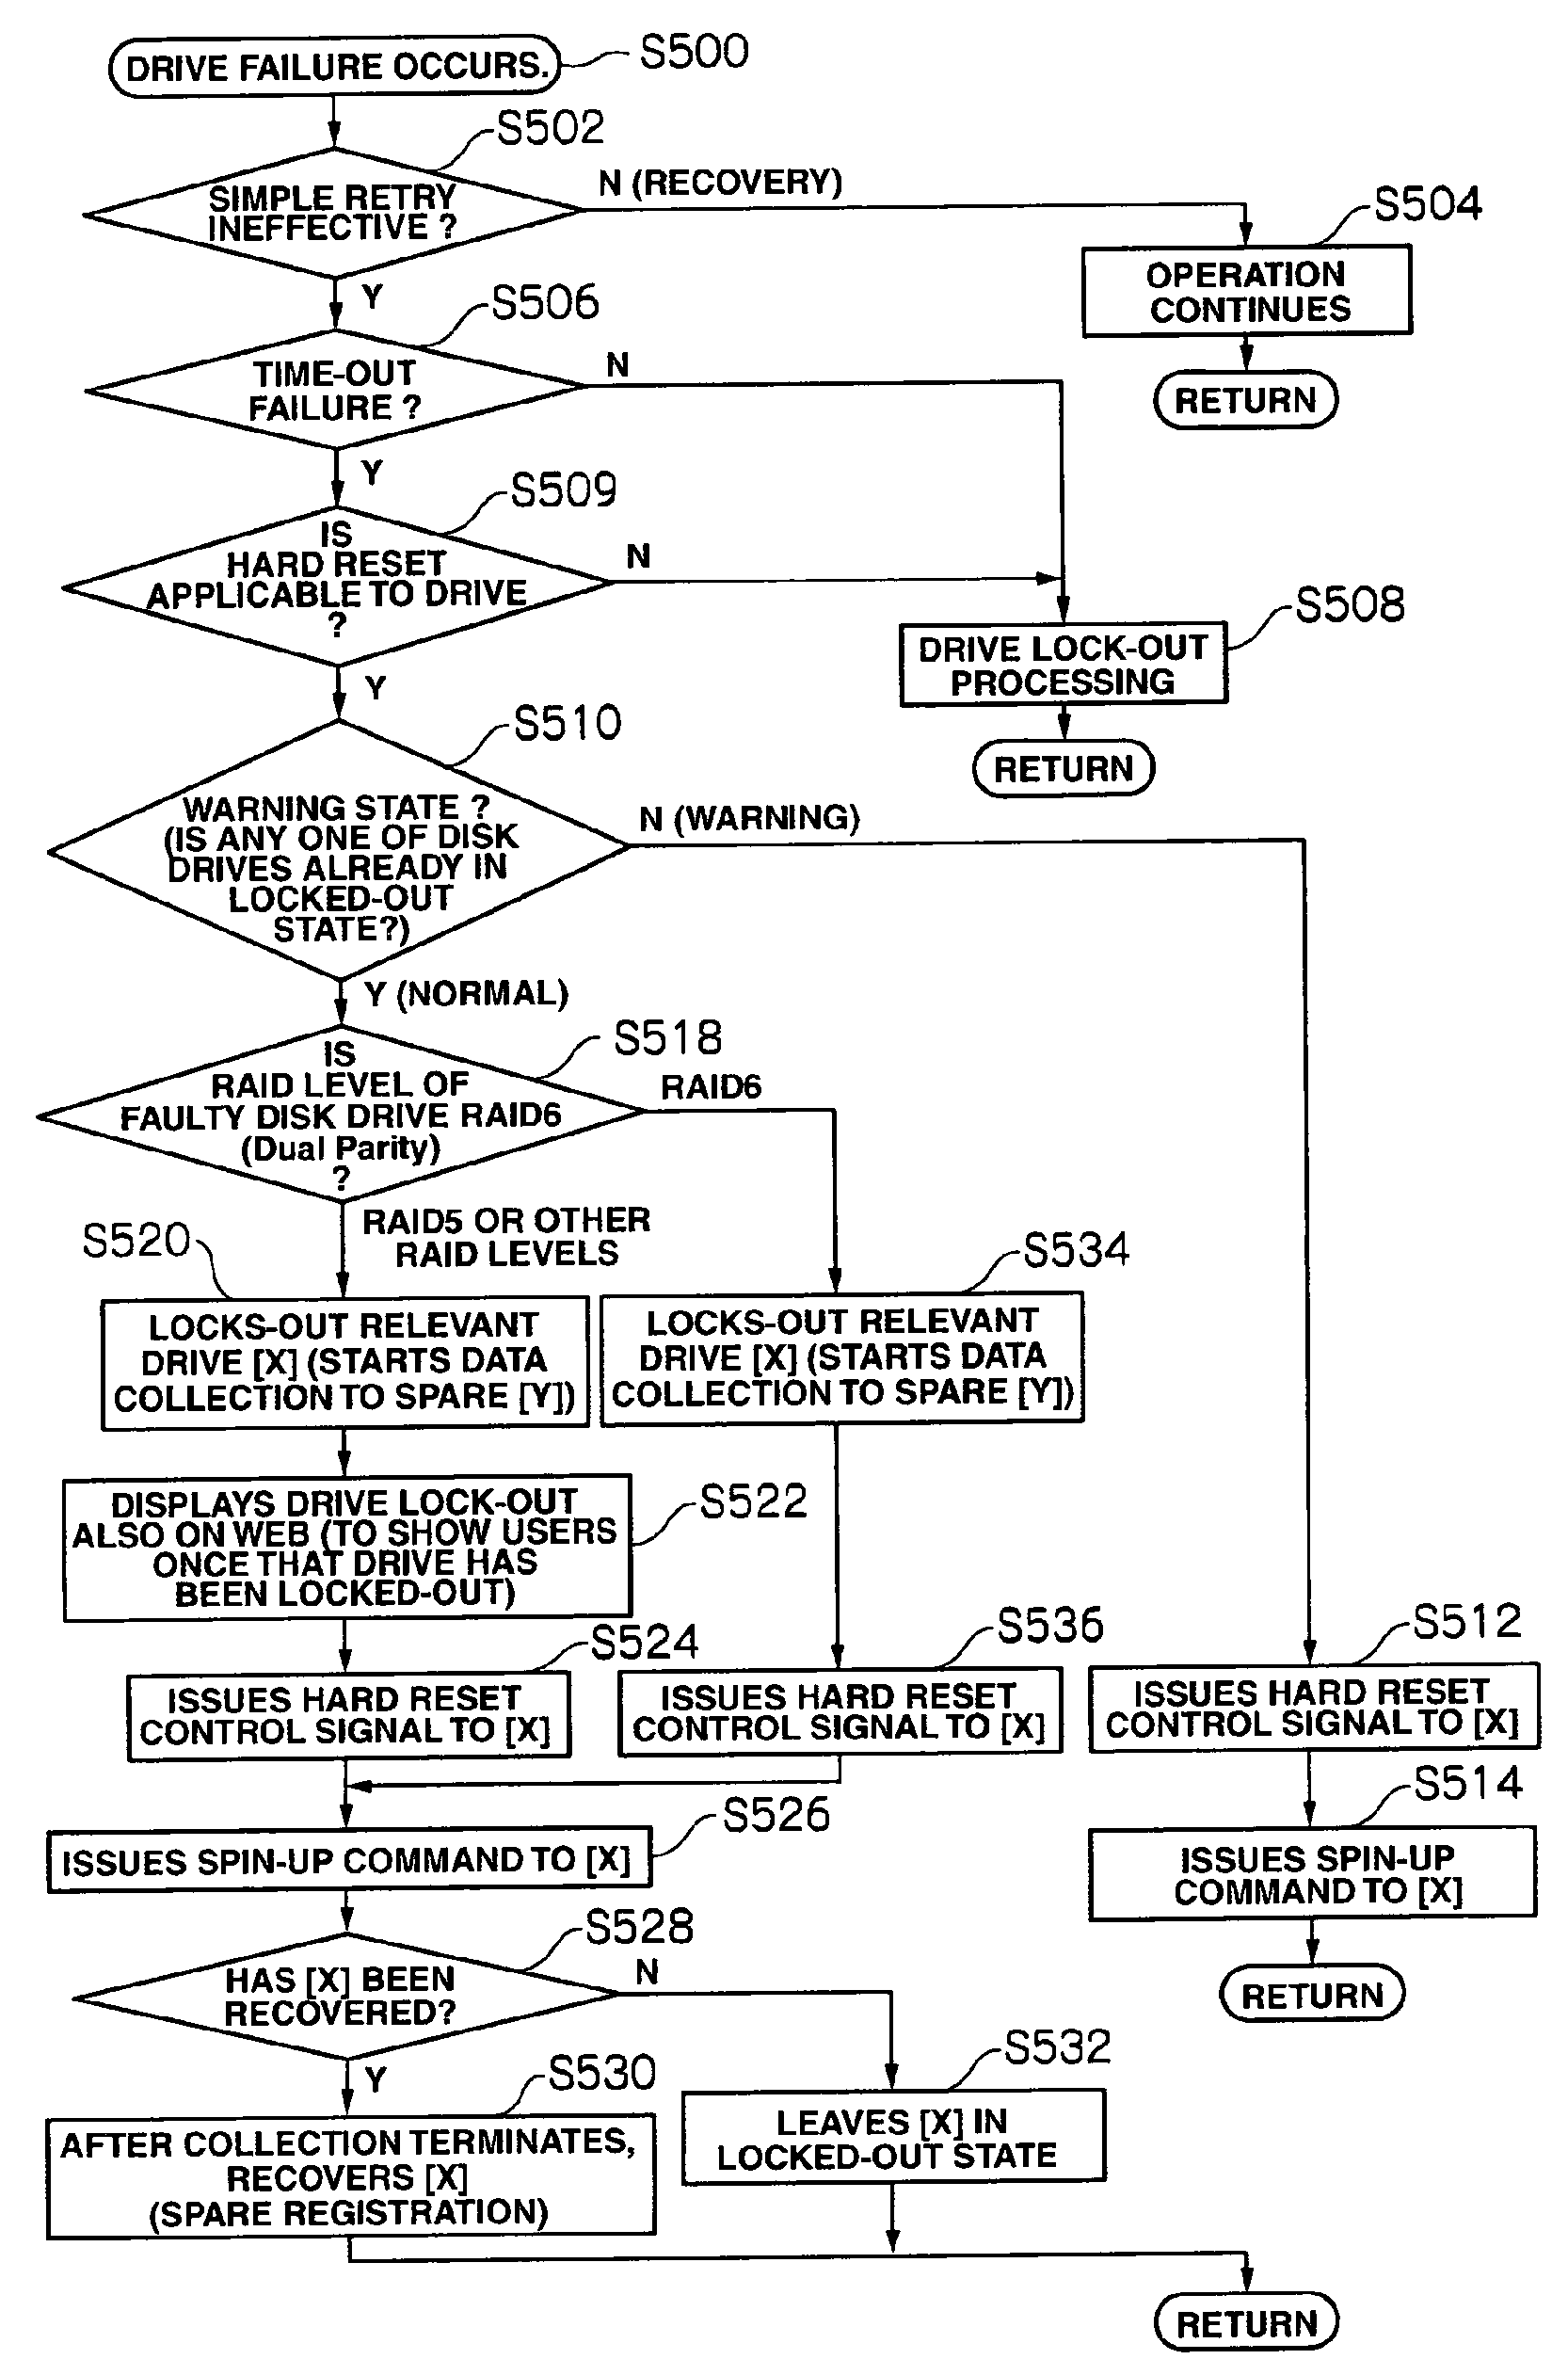 Disk array apparatus and method for controlling the same